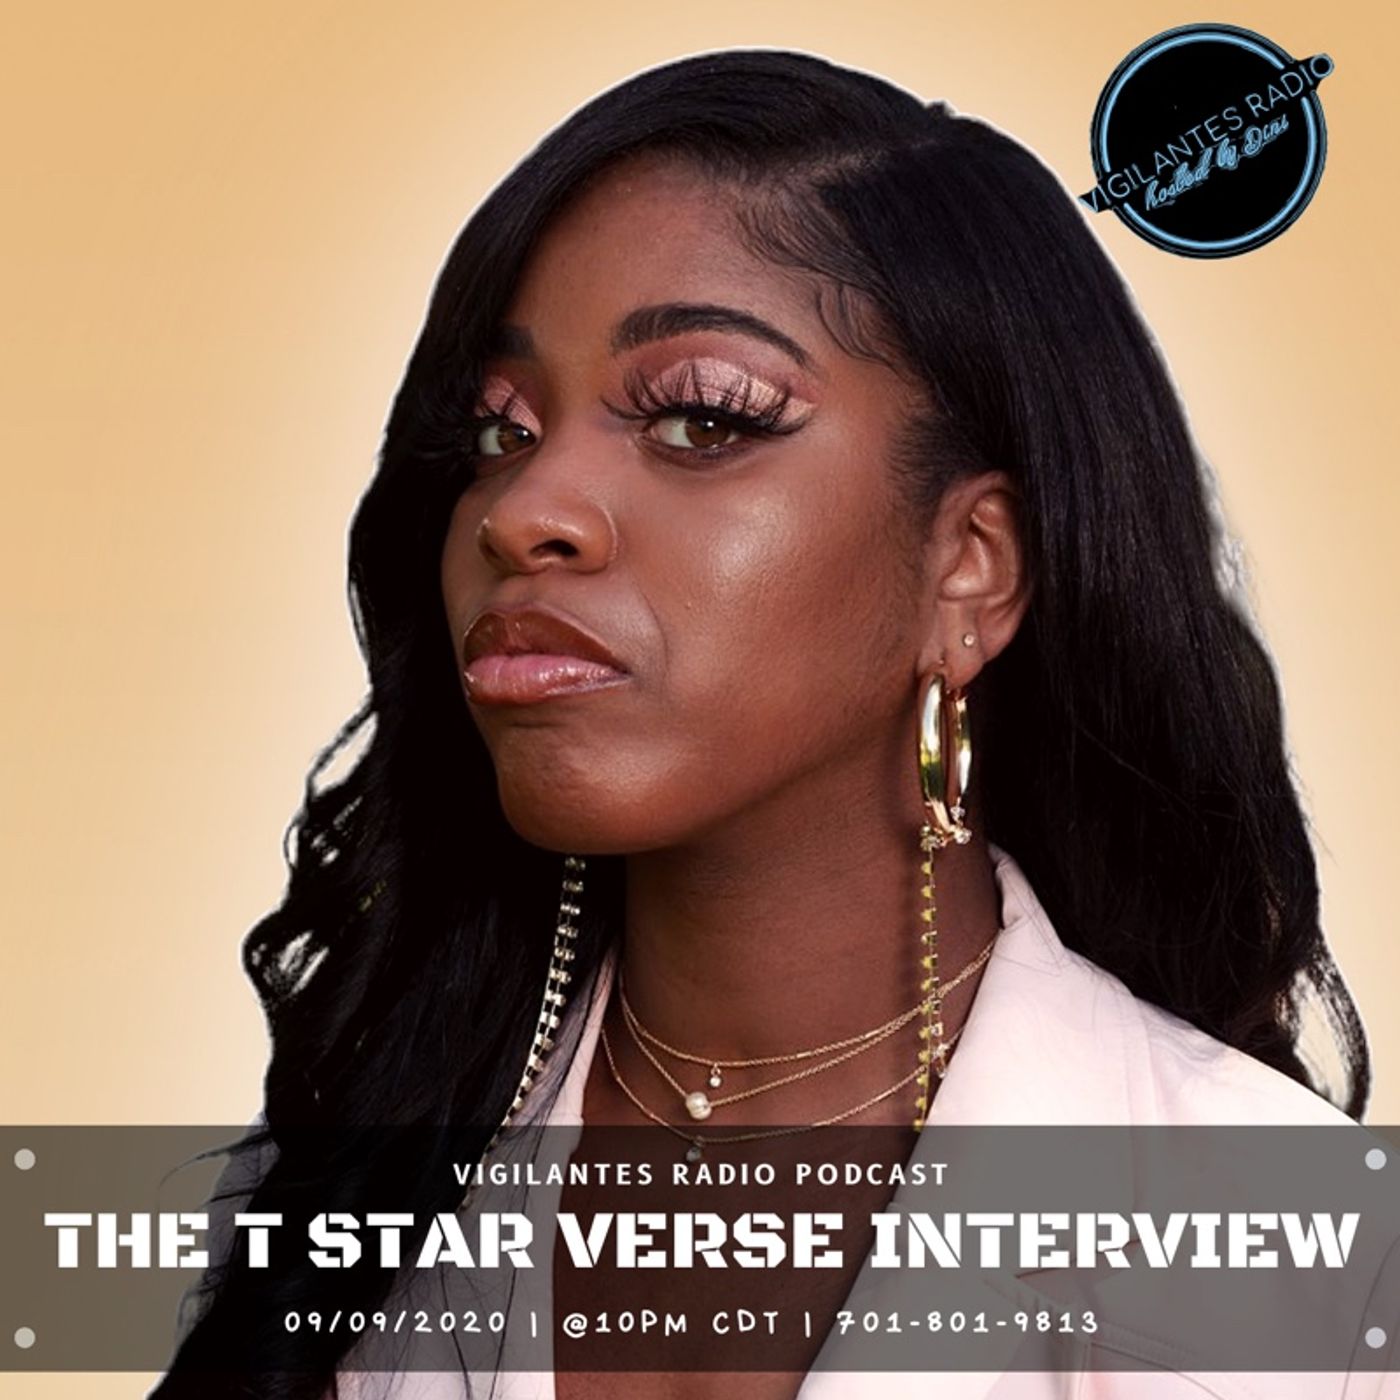 The T Star Verse Interview. Image